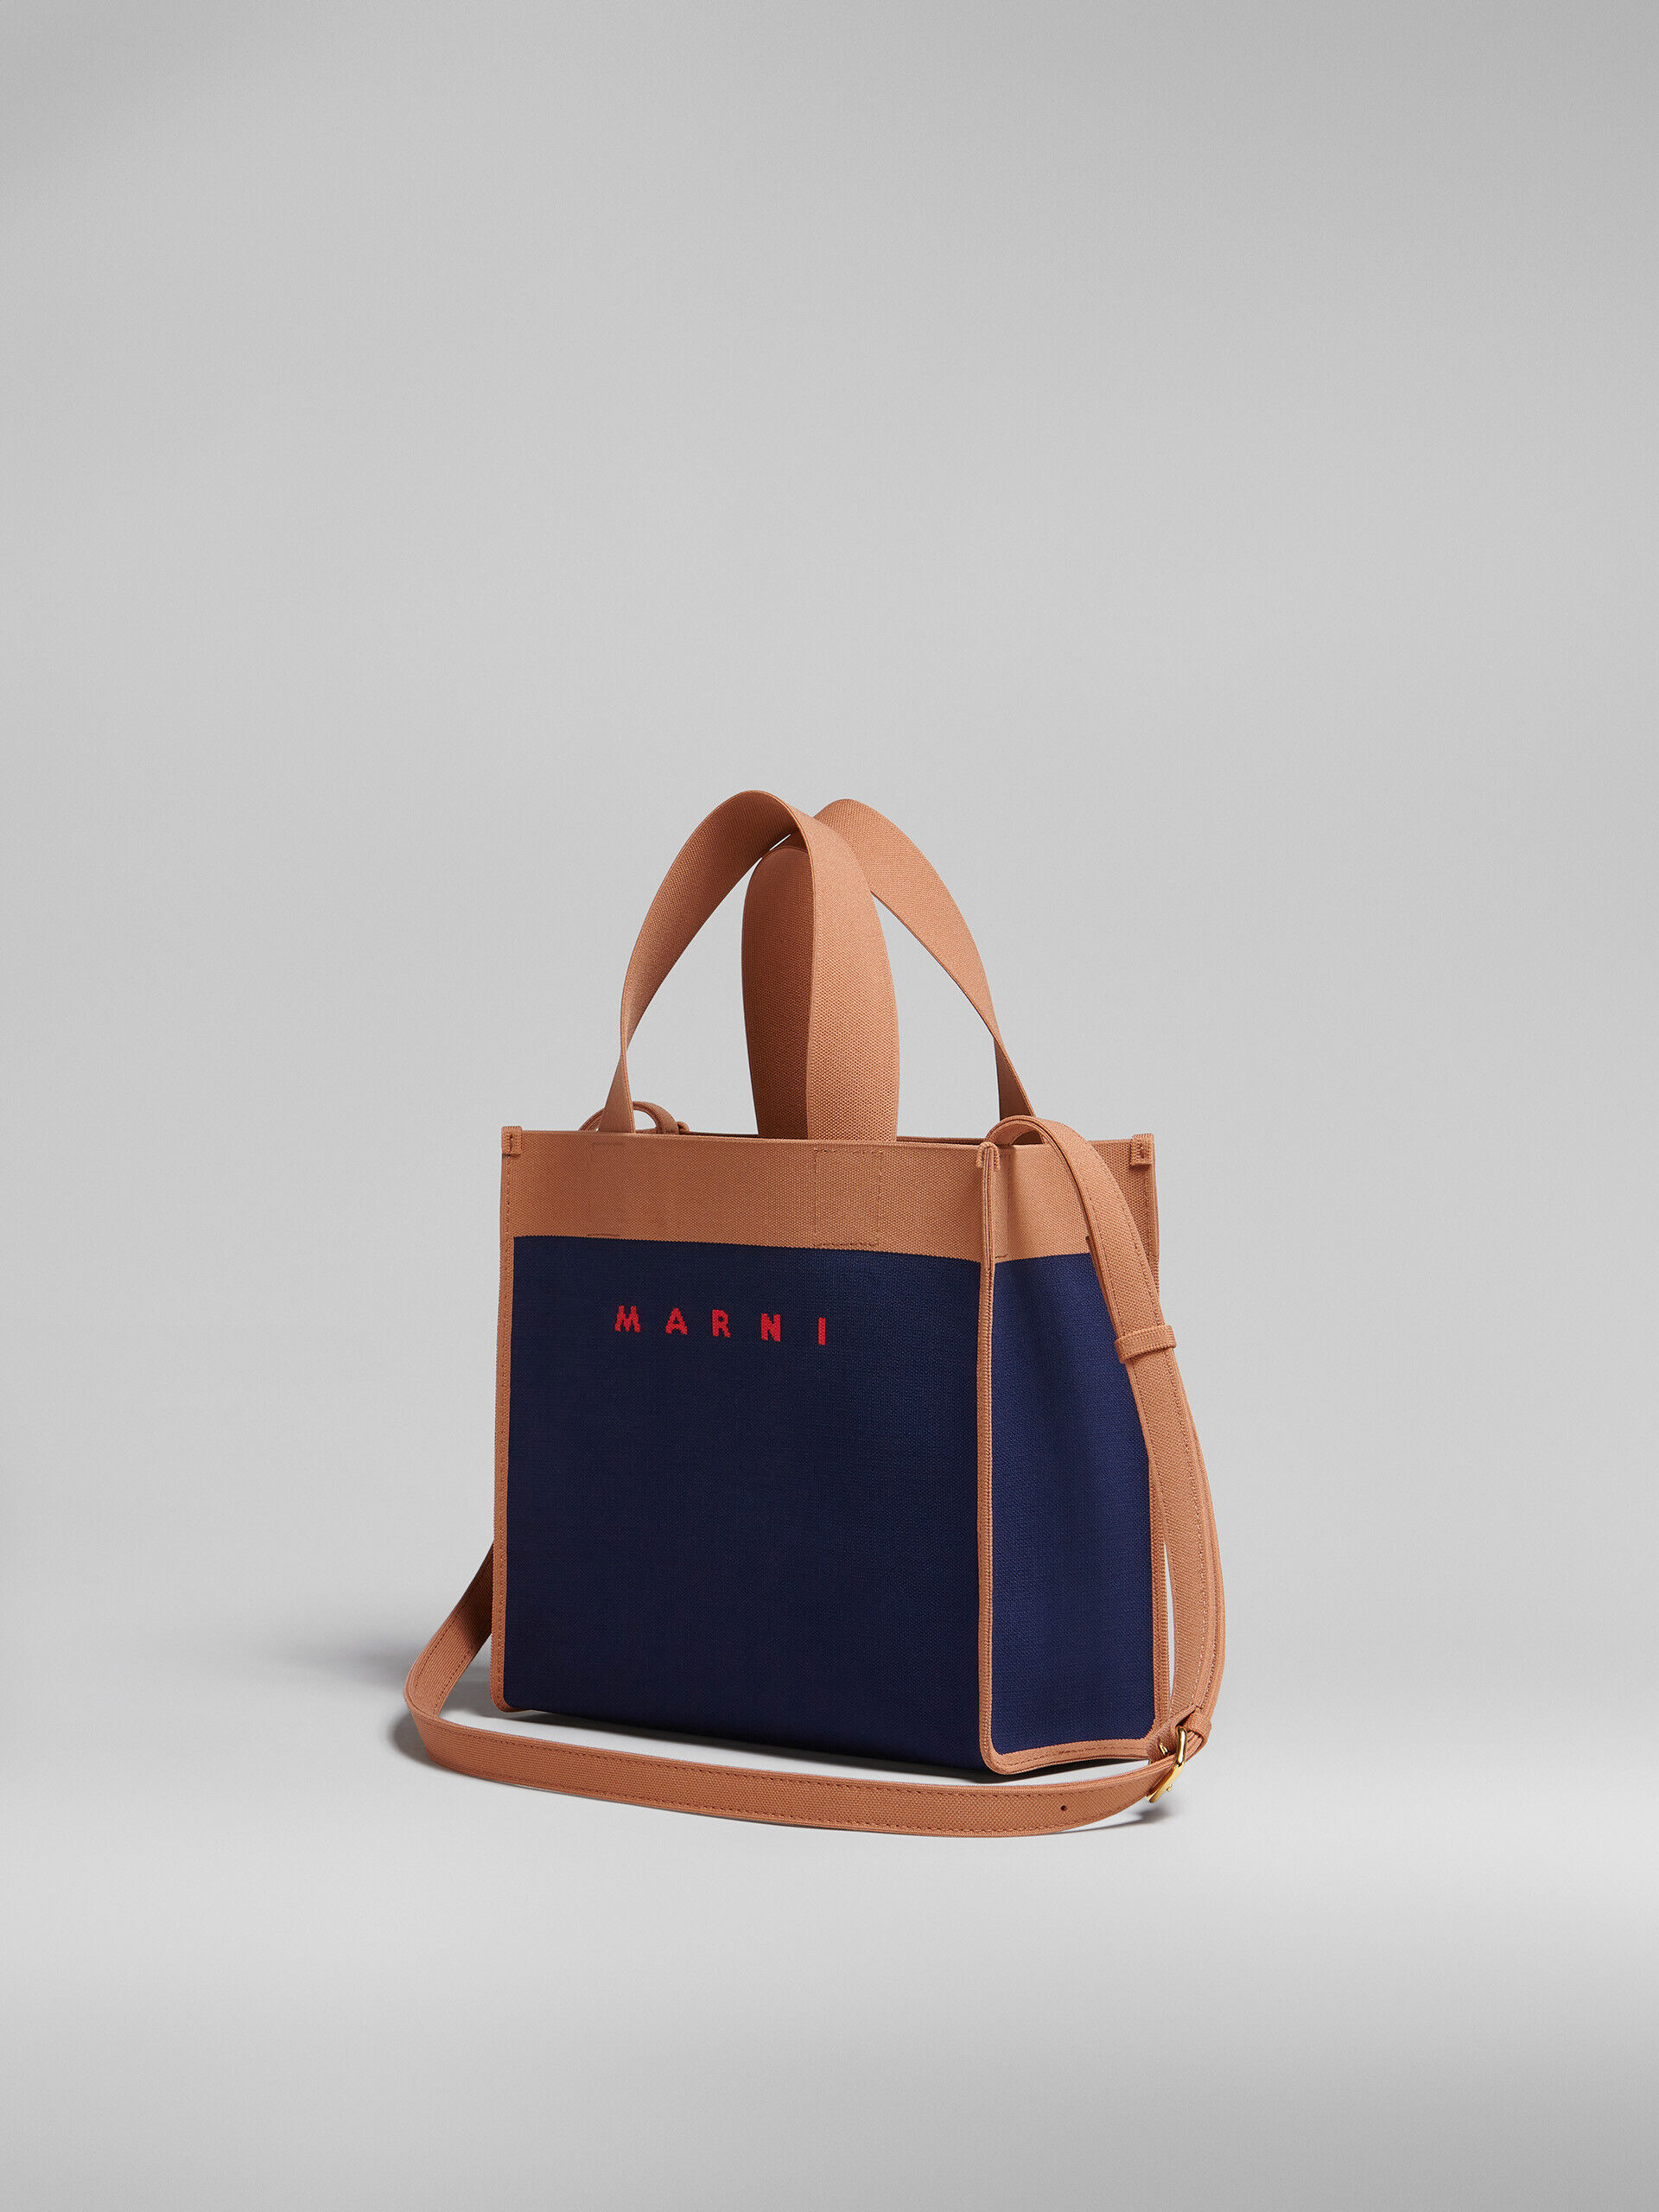 Small shopping bag in blue and brown jacquard | Marni